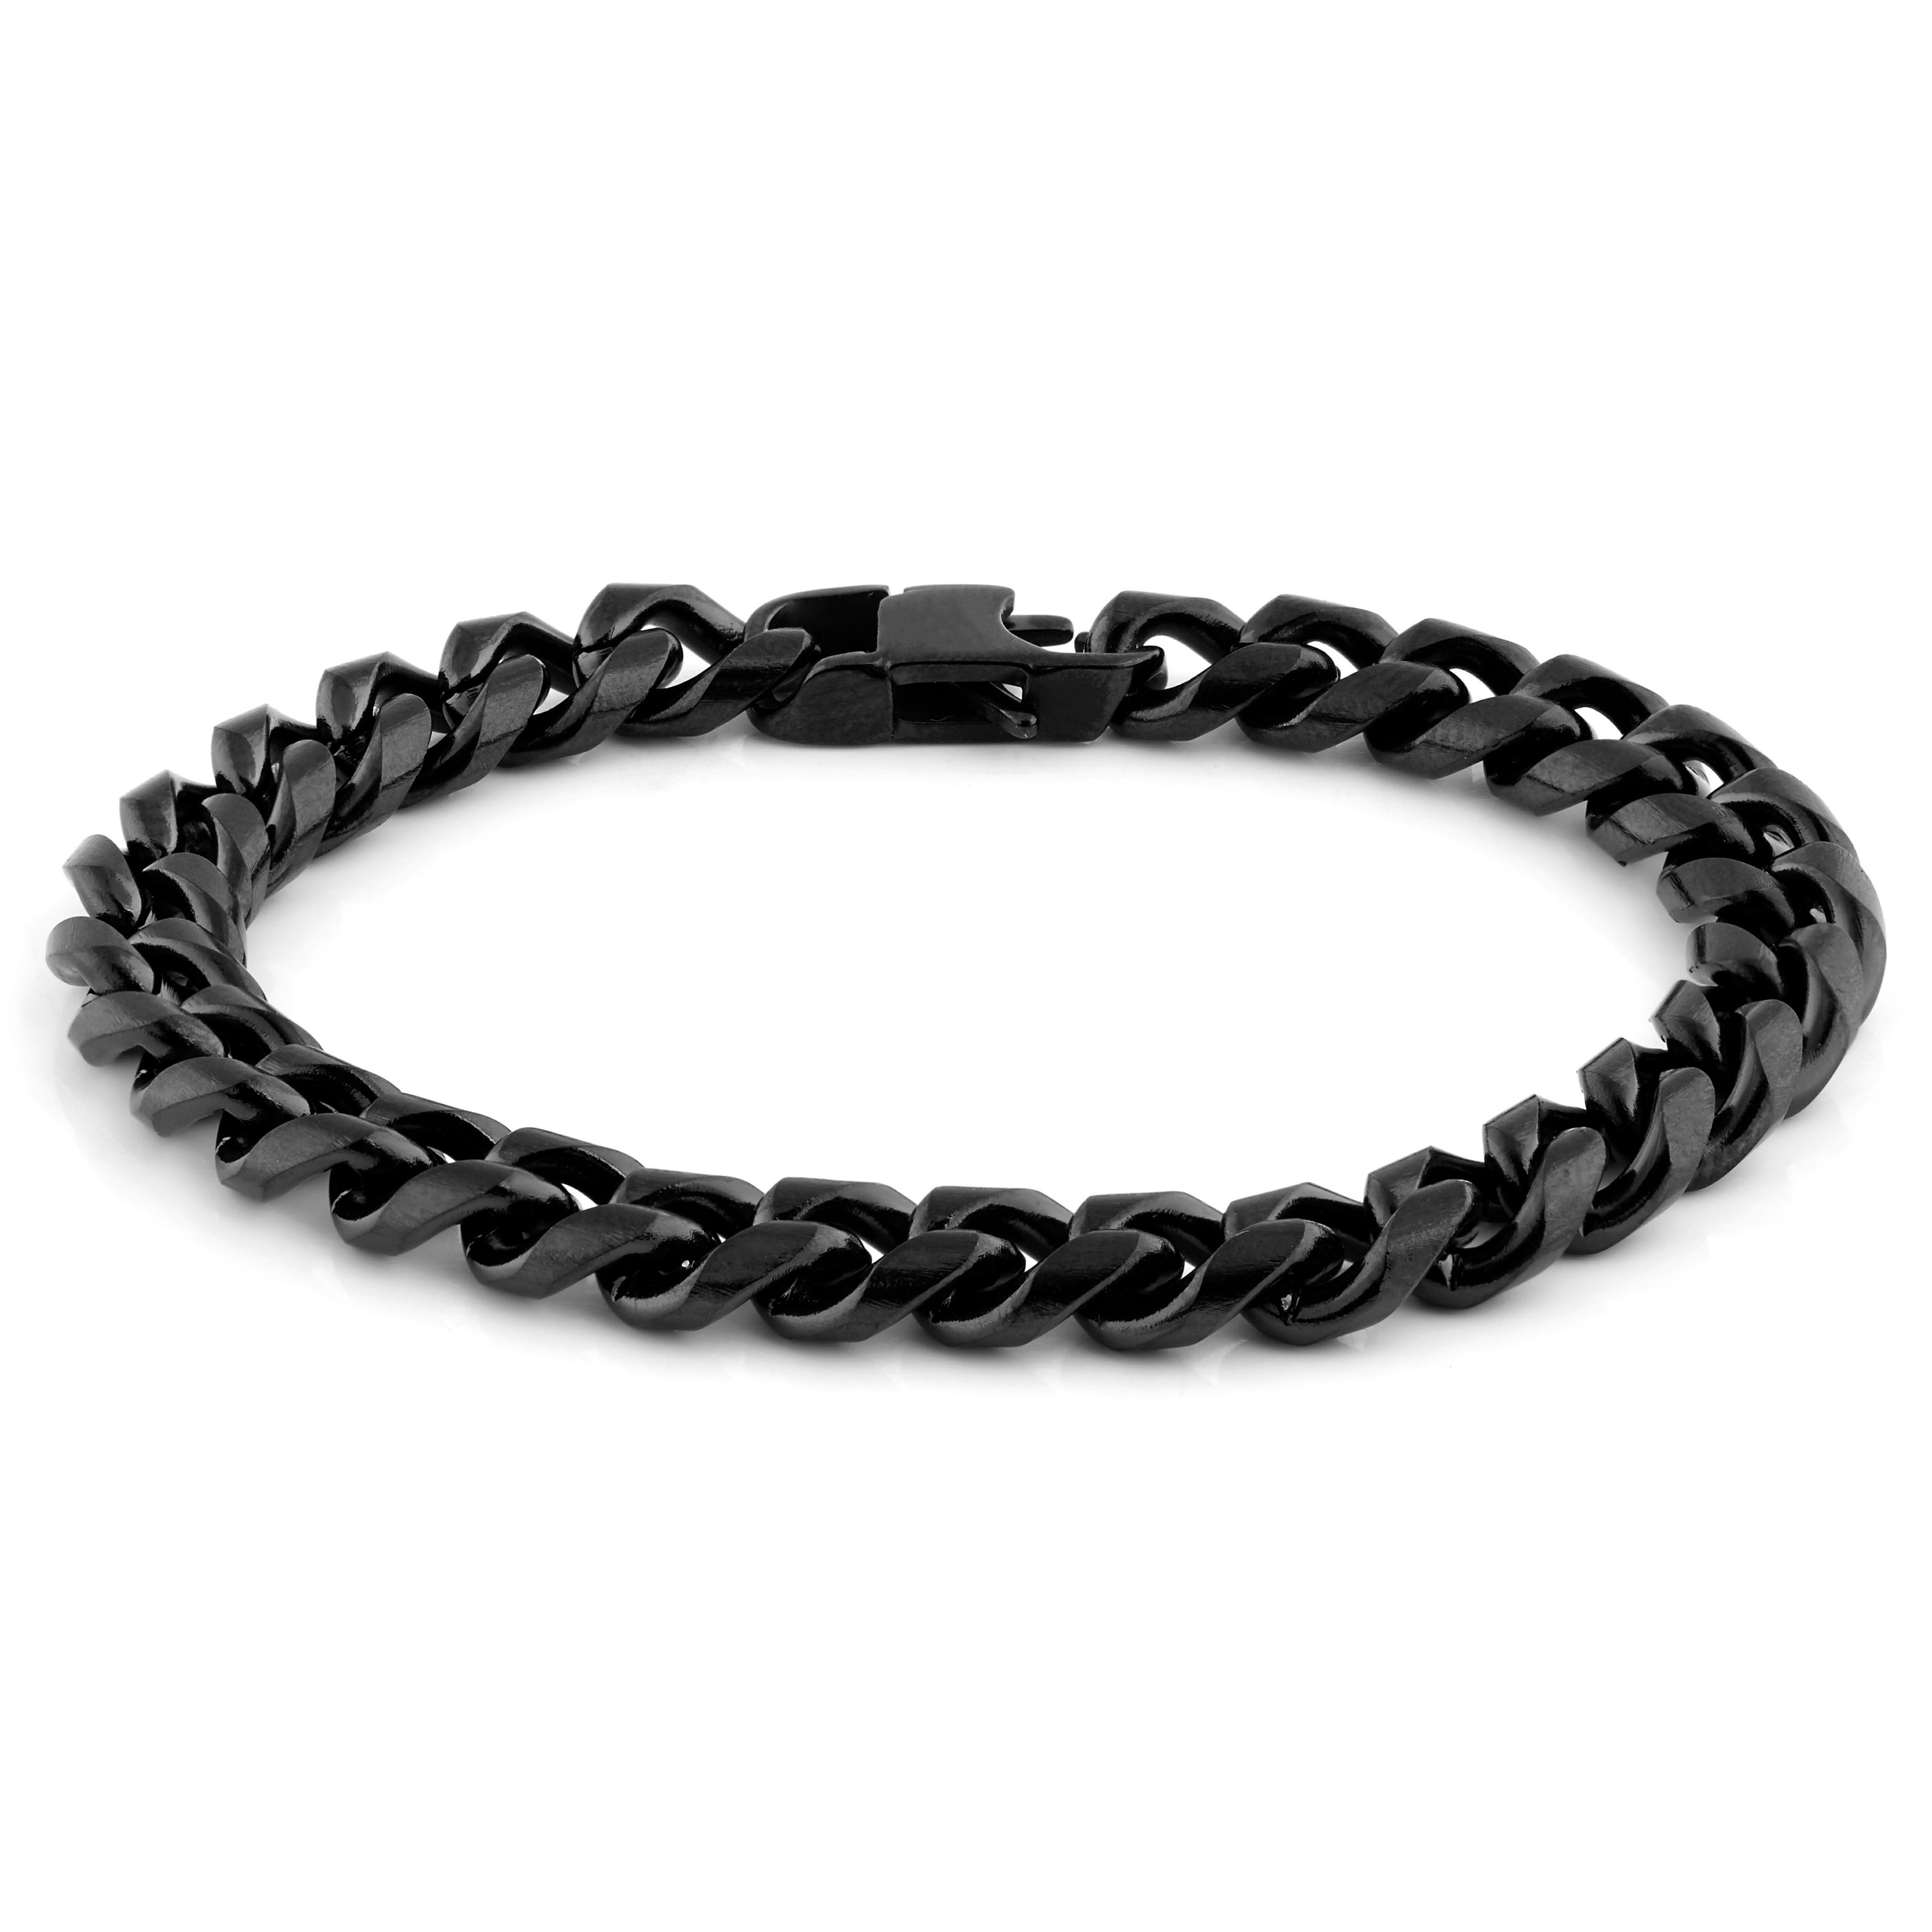 8mm Black Stainless Steel Curb Chain Bracelet